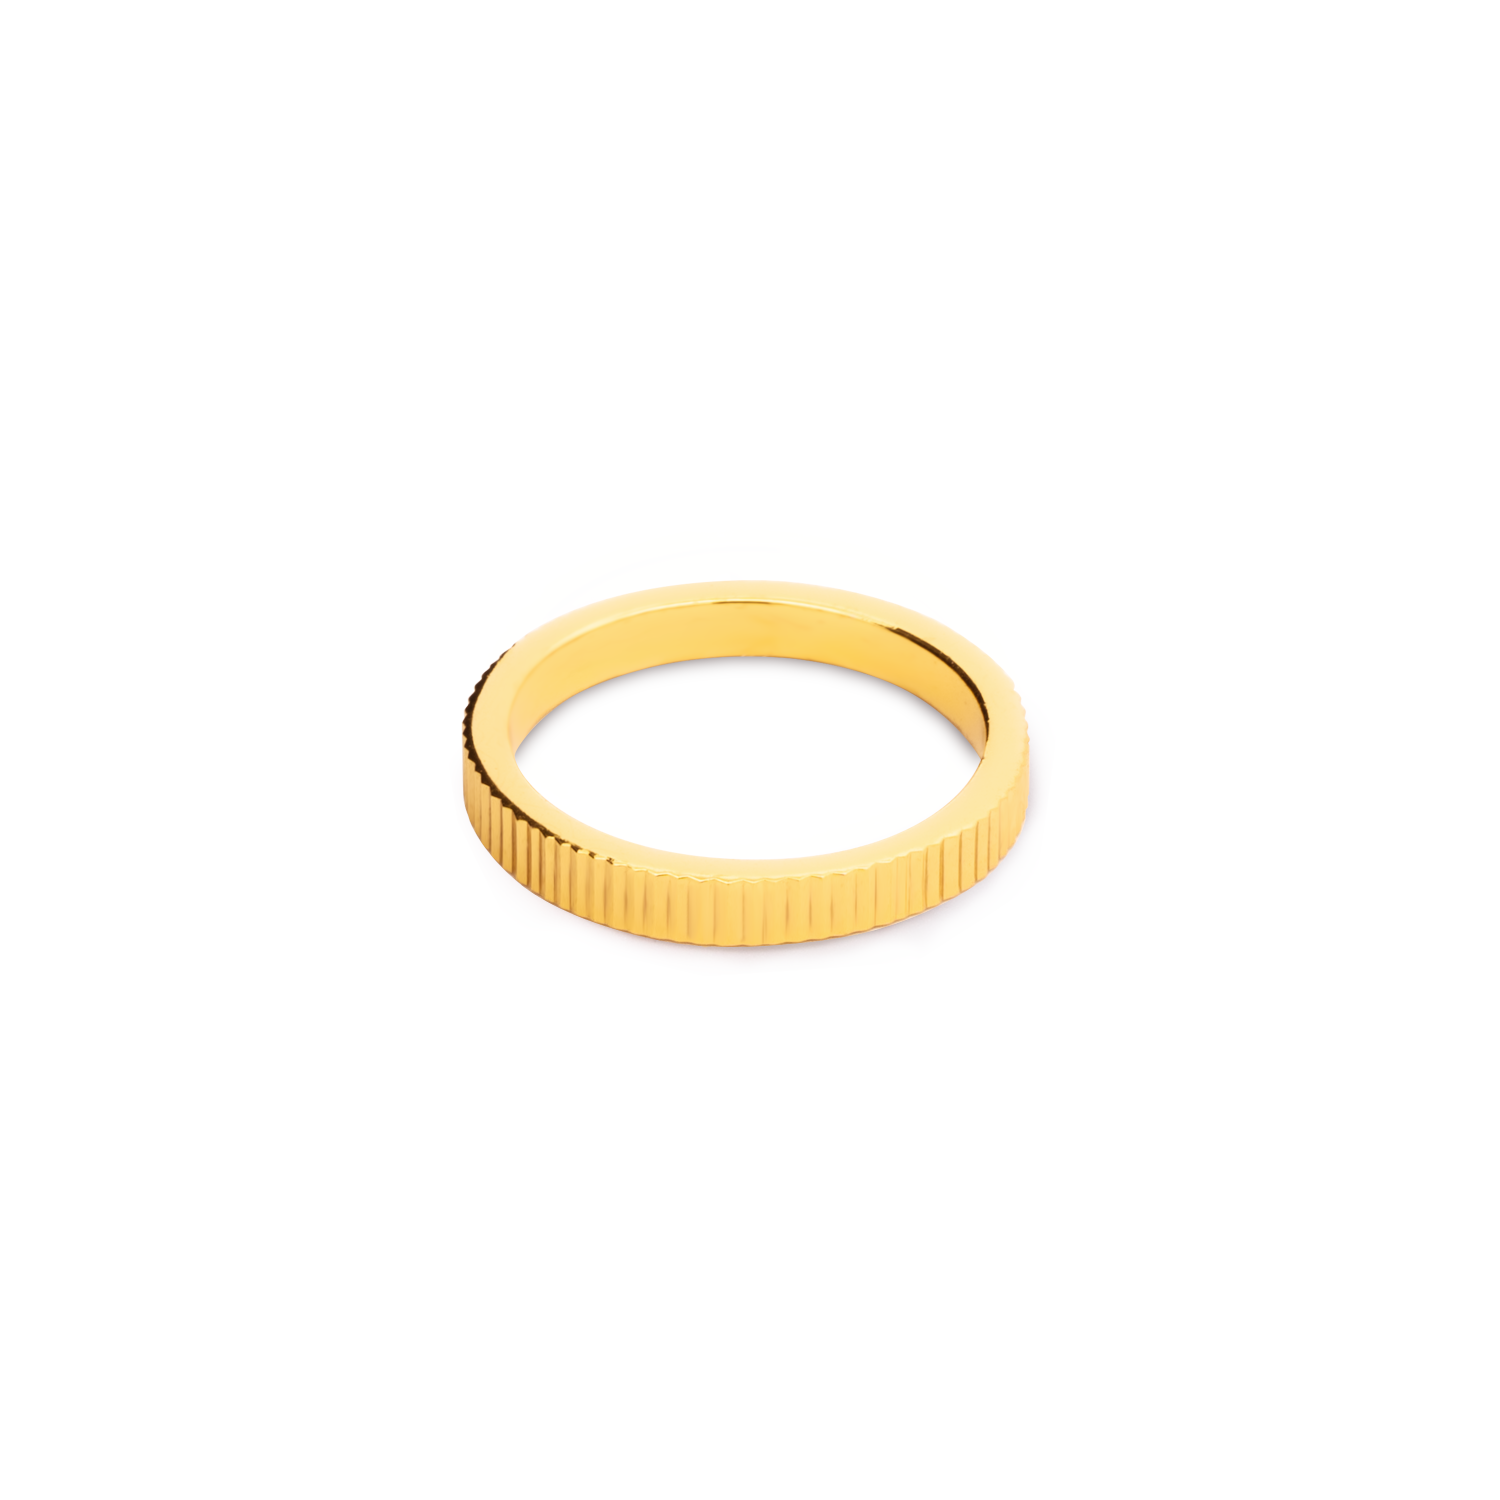 Elegant and statement textured ring in gold.